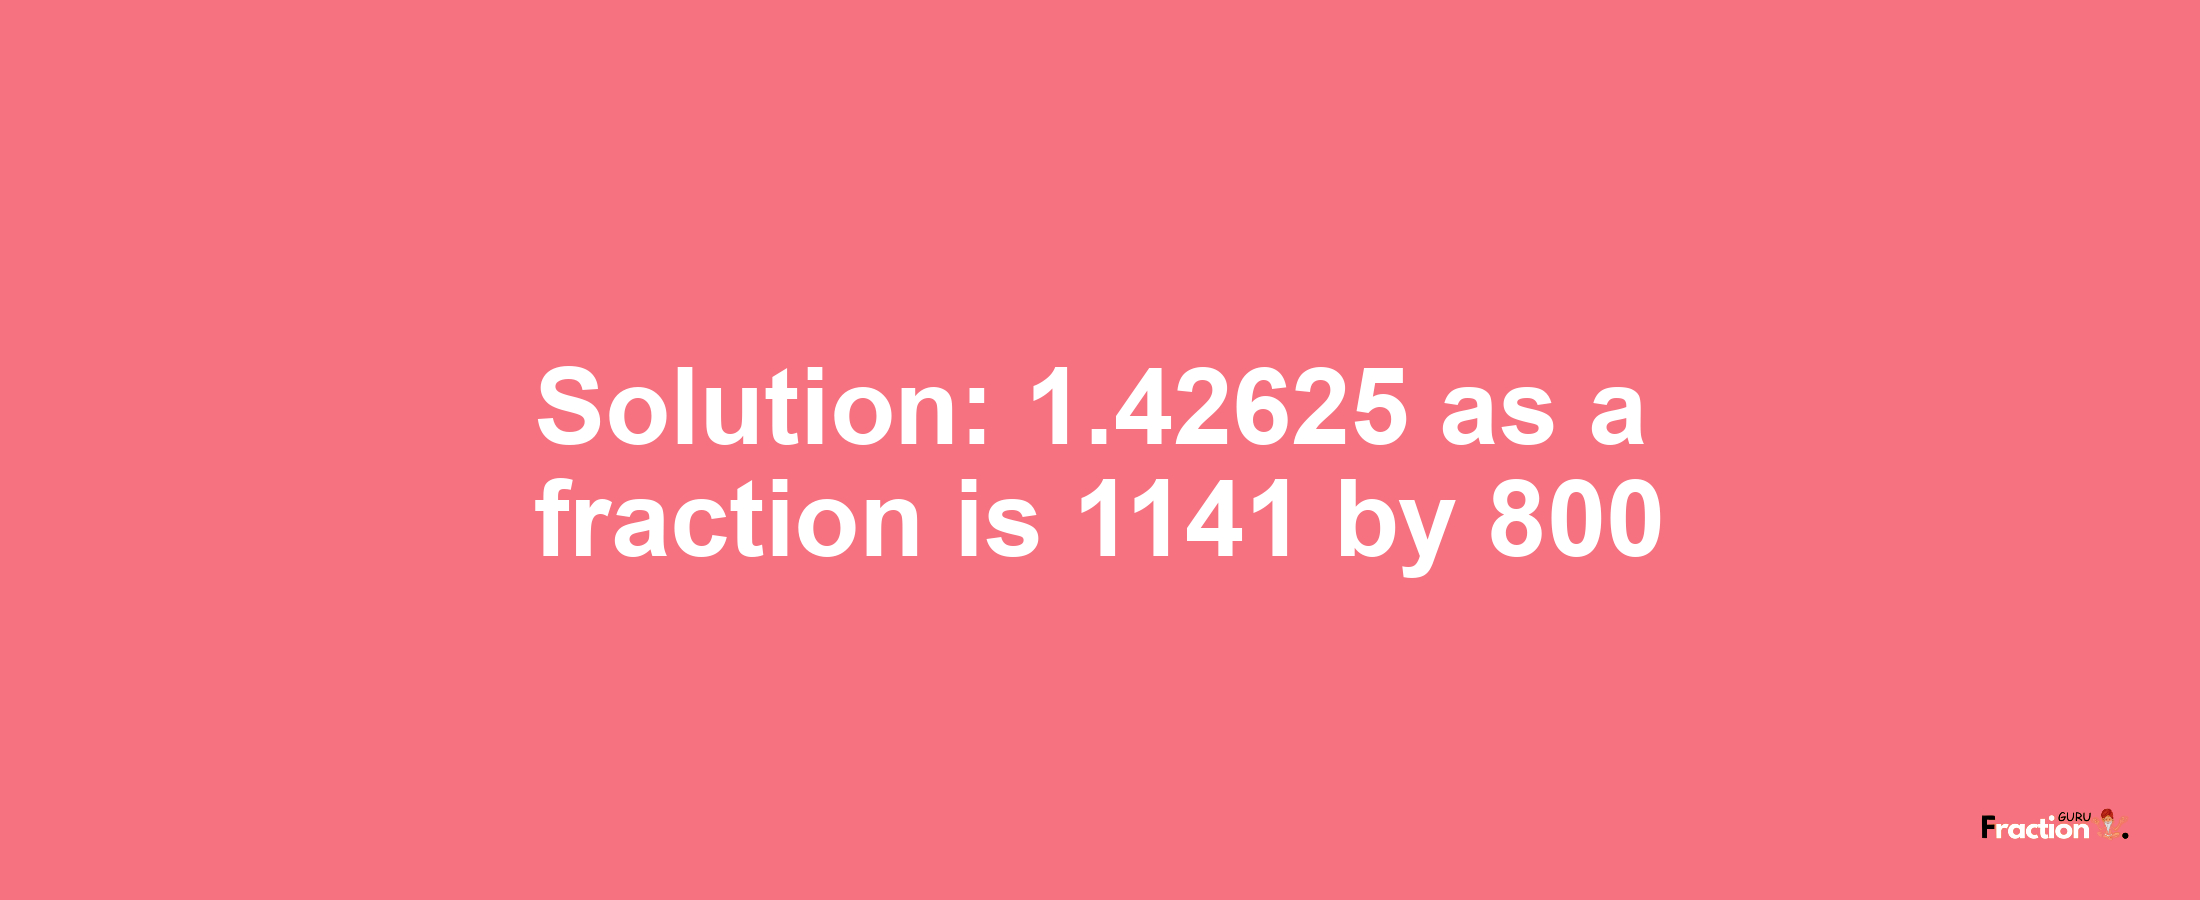 Solution:1.42625 as a fraction is 1141/800